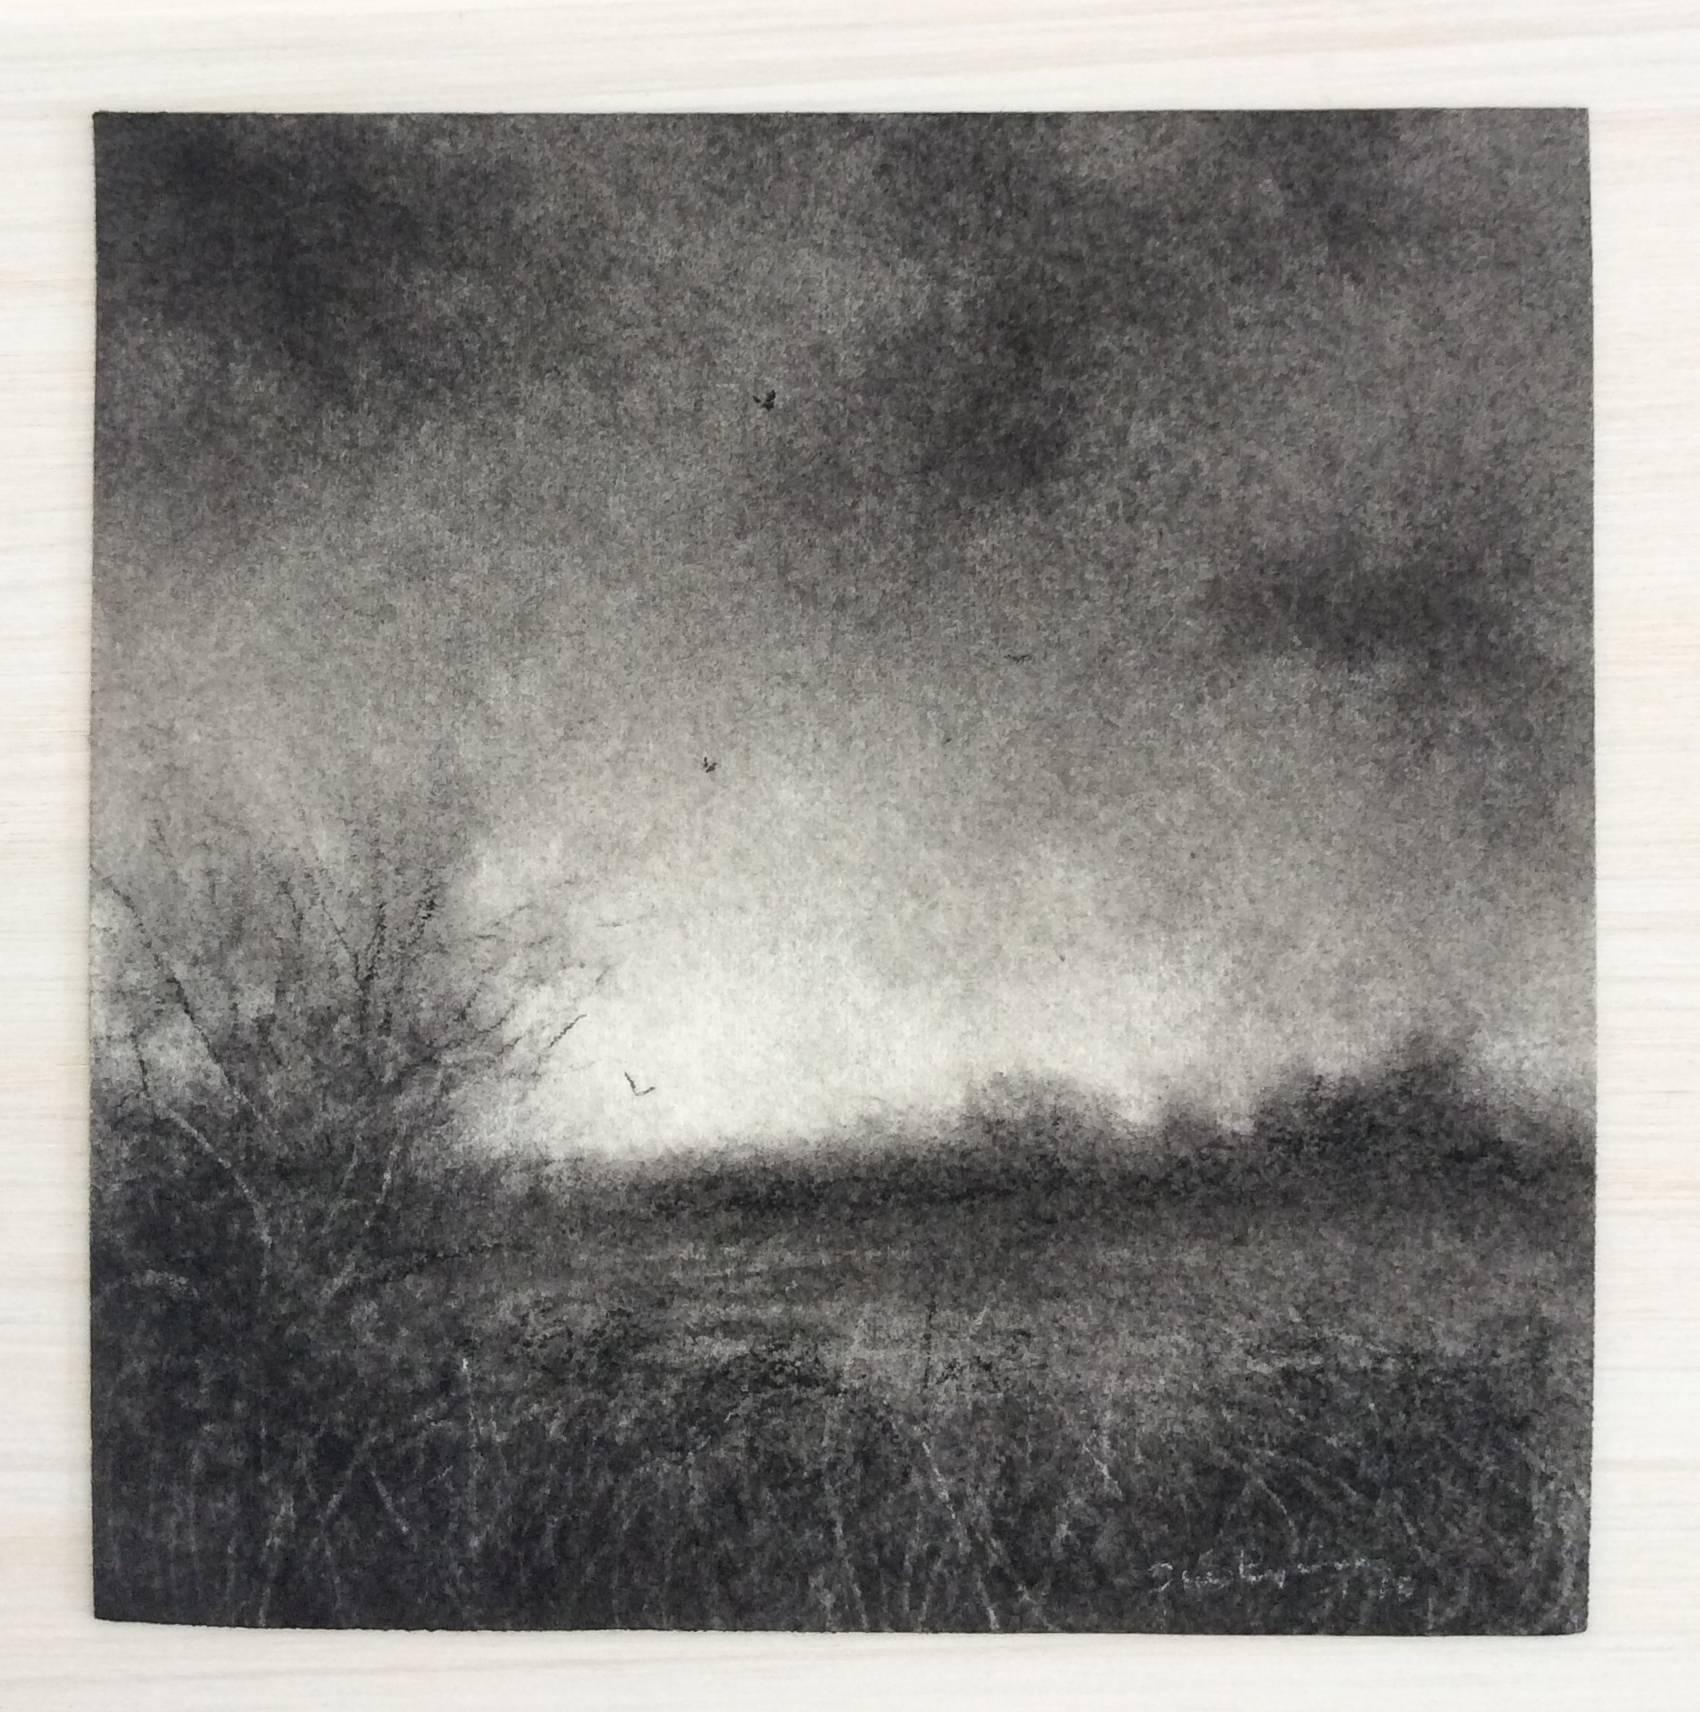 Edgeland XV (Small Realistic Landscape Drawing in Black Charcoal) - Art by Sue Bryan